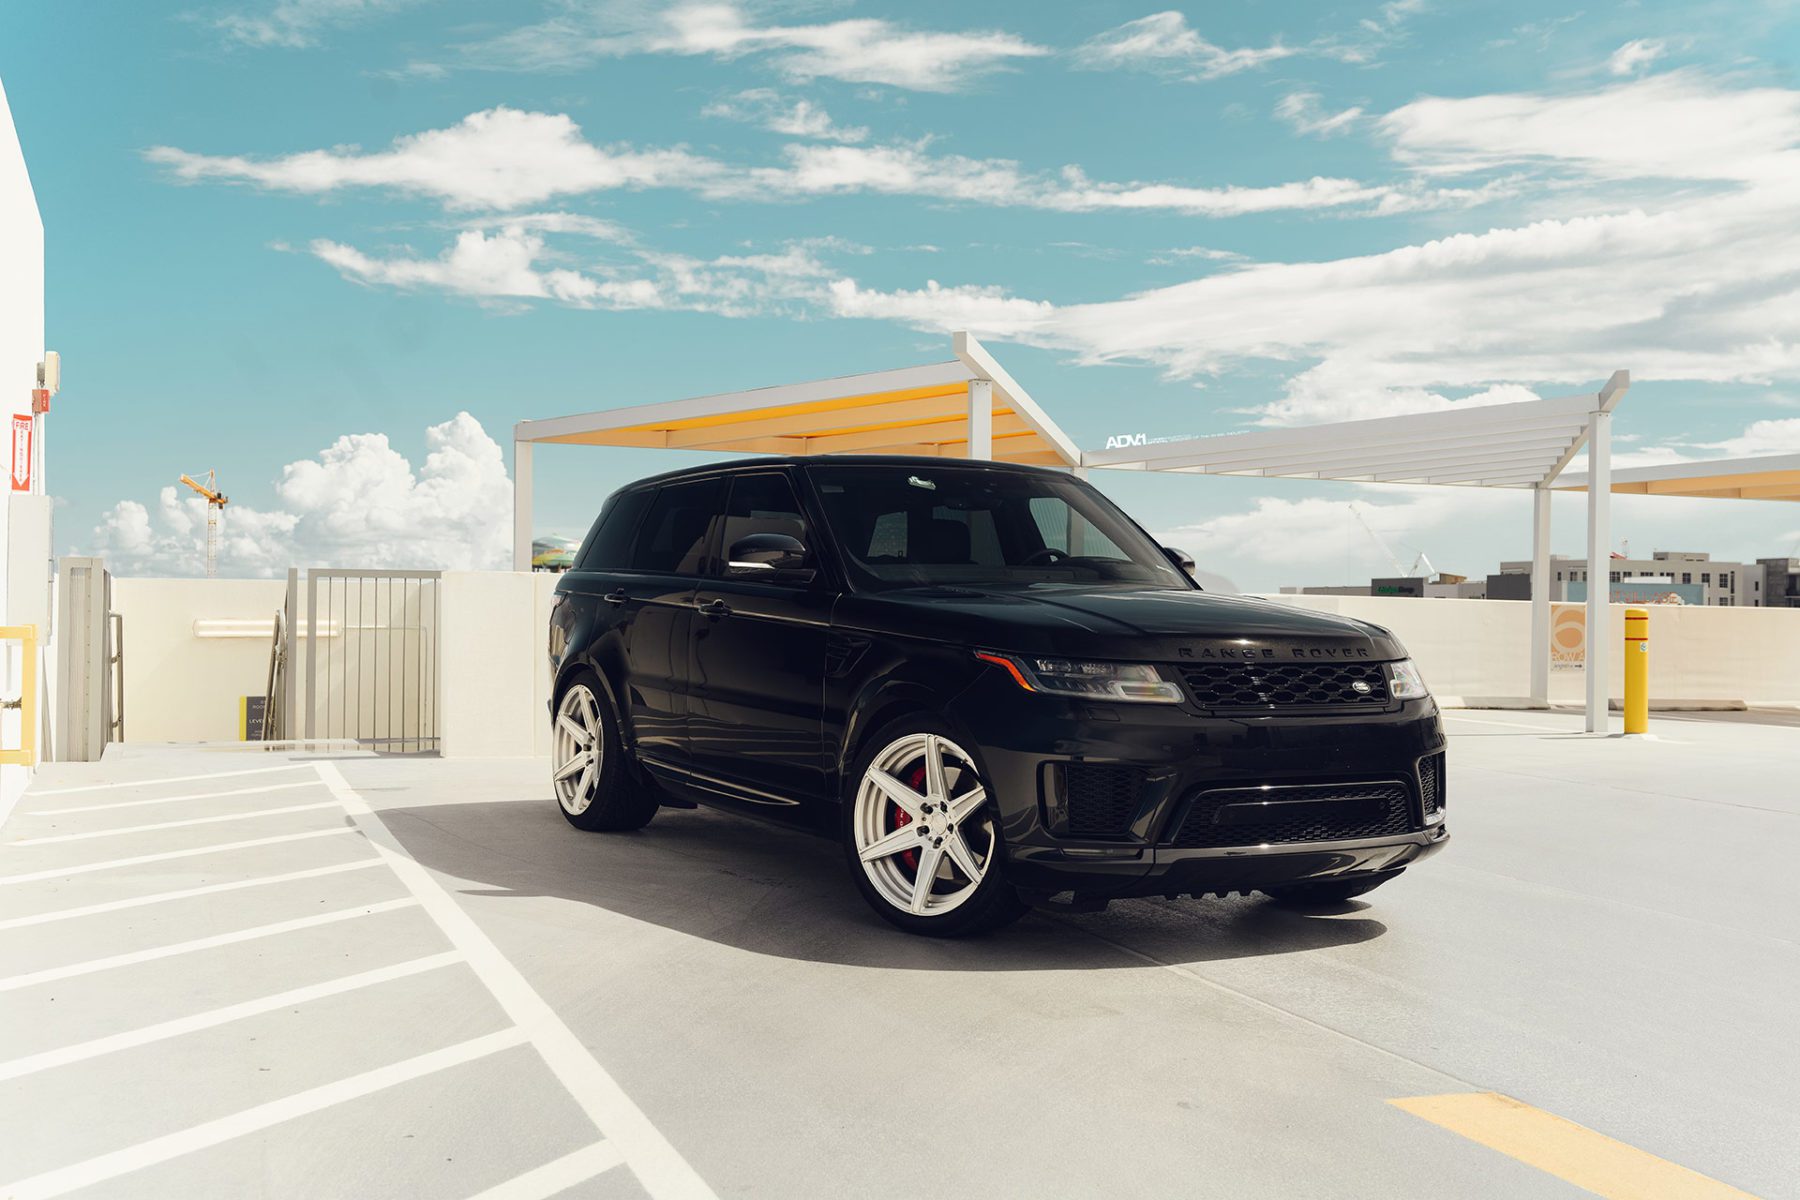 Black Range Rover SVR Gets A Sick Upgrade From ADV.1 Wheels